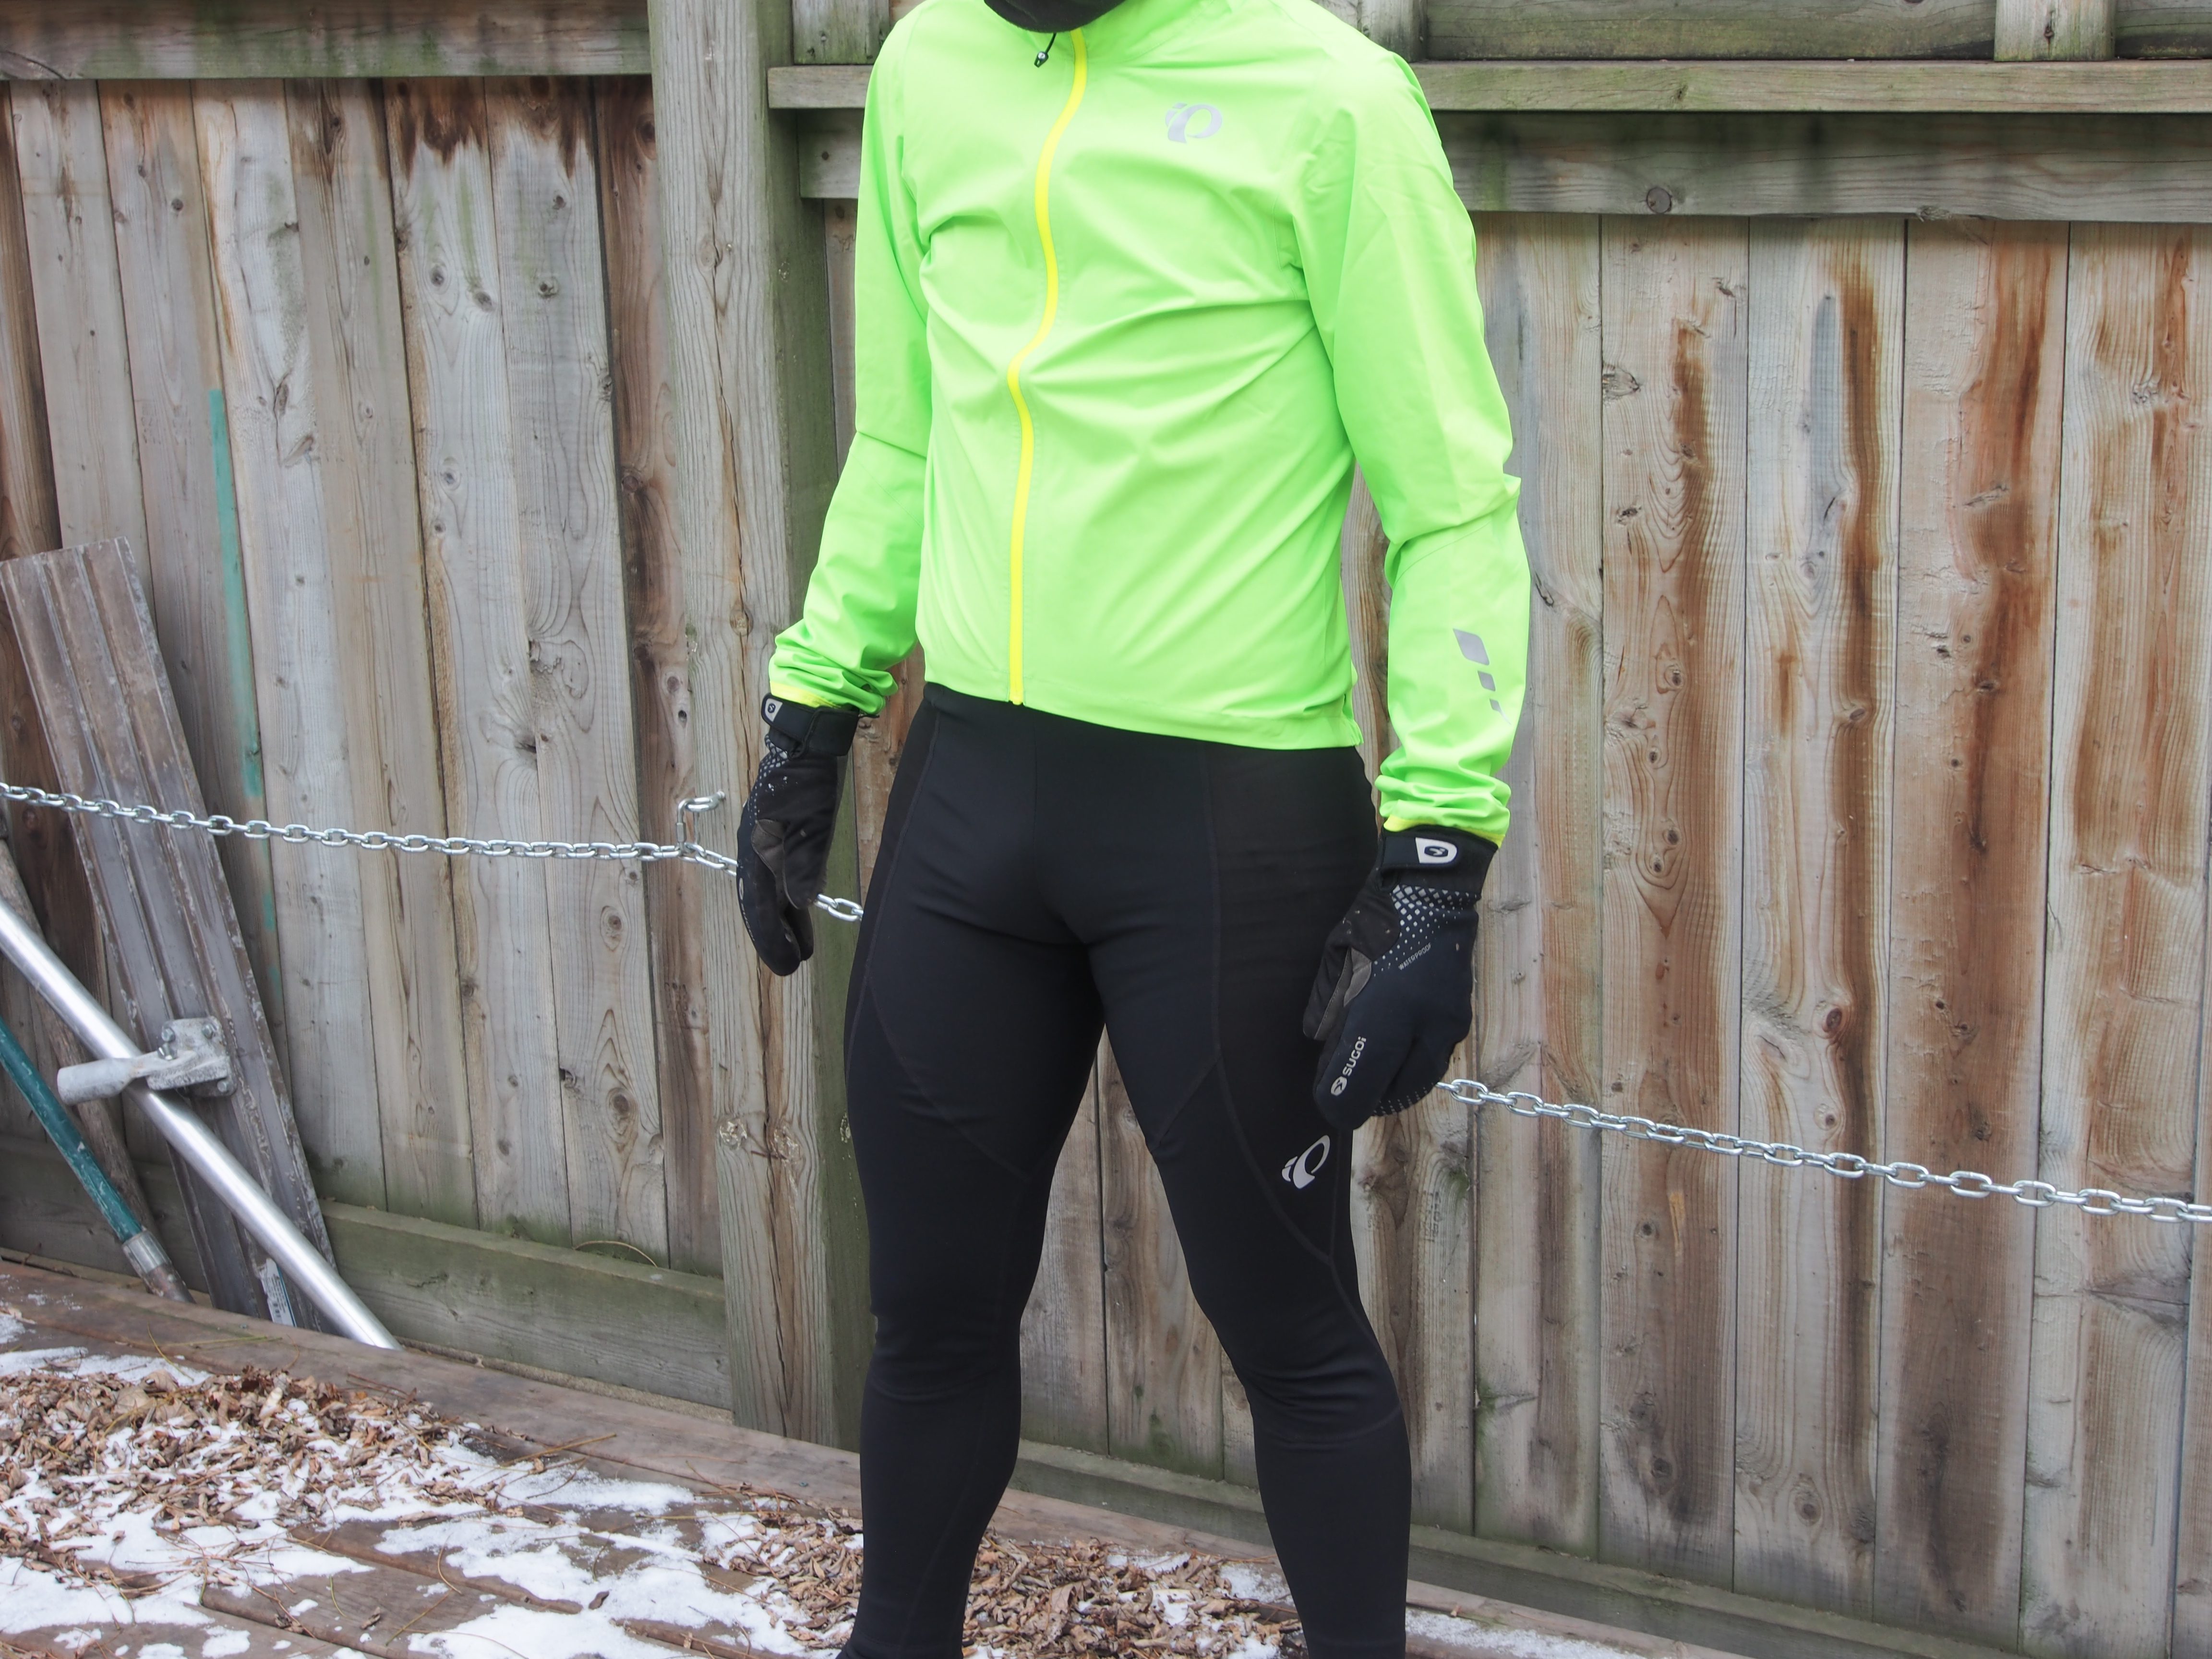 Stay protected this winter with these pieces from Pearl Izumi